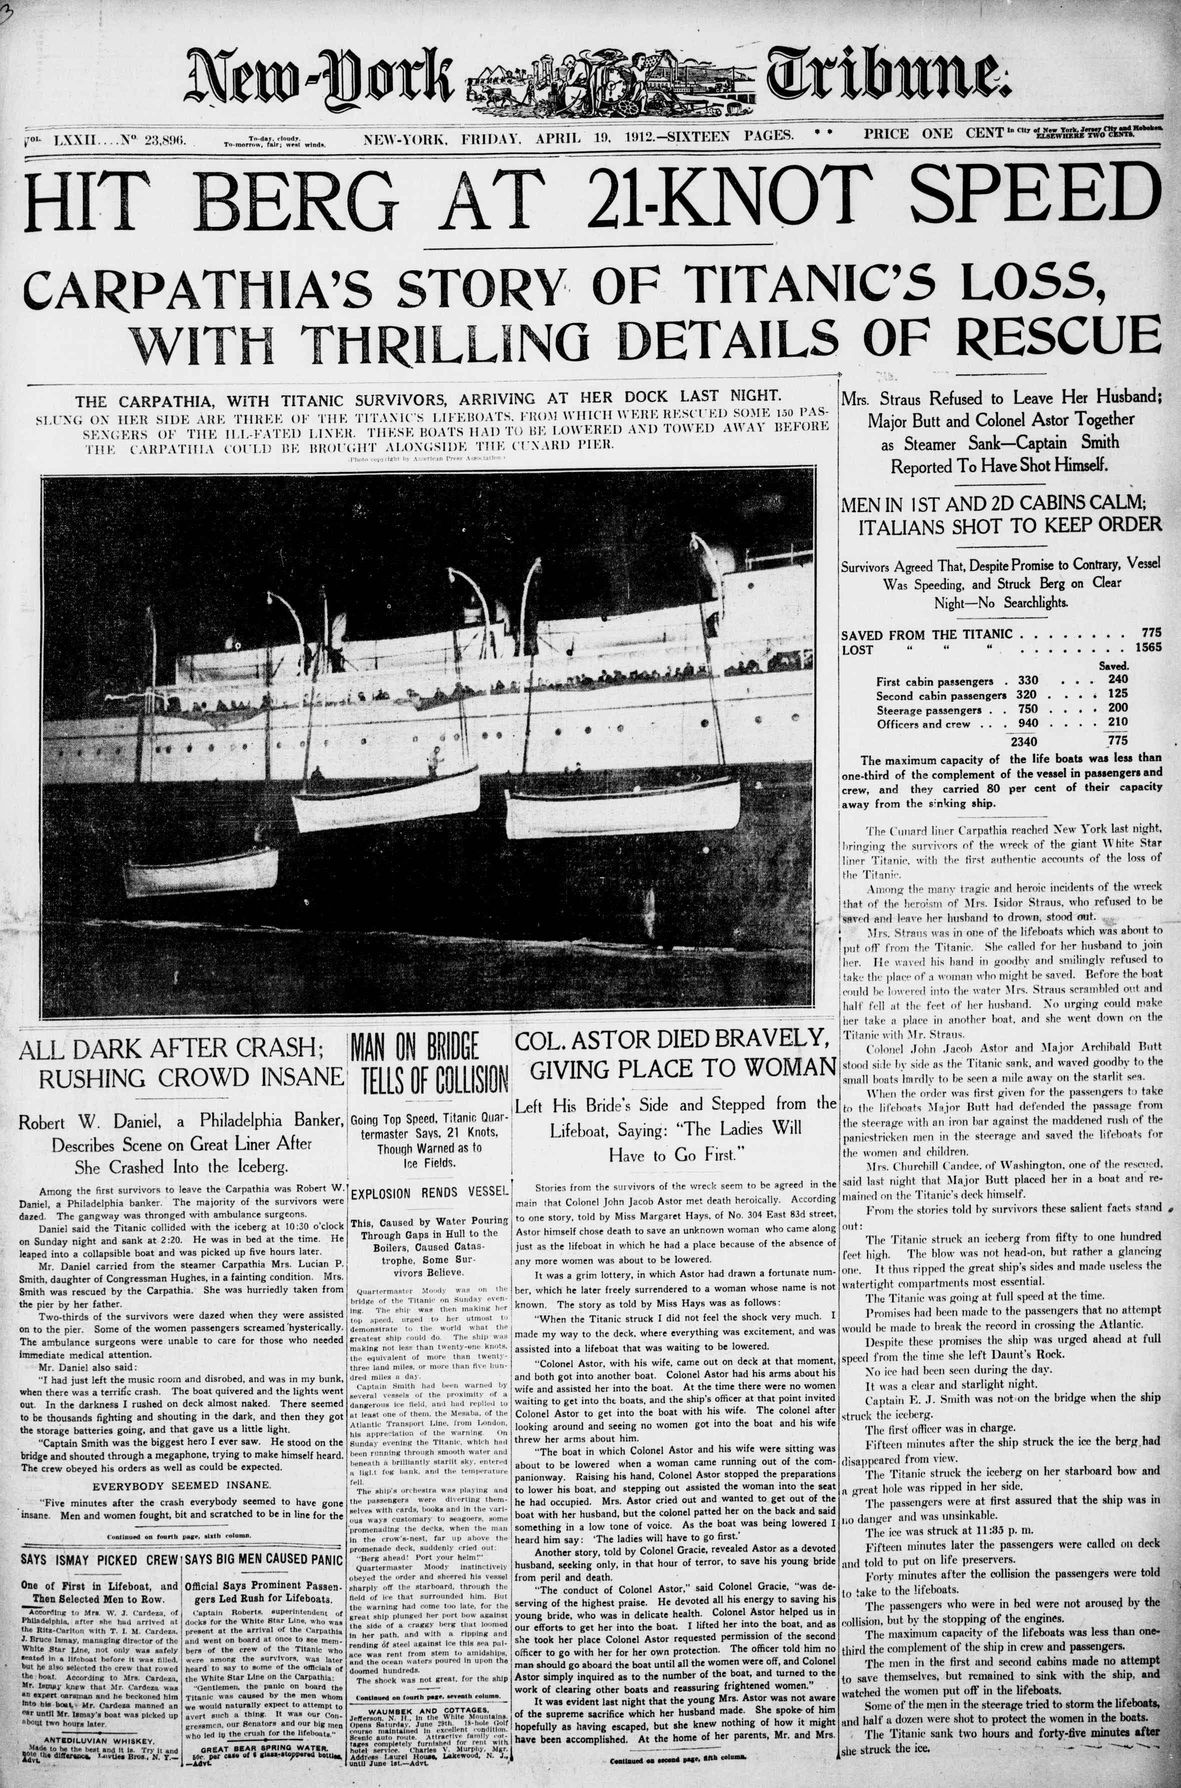 Titanic_Newspaper_Front_Page_1912-04-19_New-York_Tribune__April_19__1912__Page_1